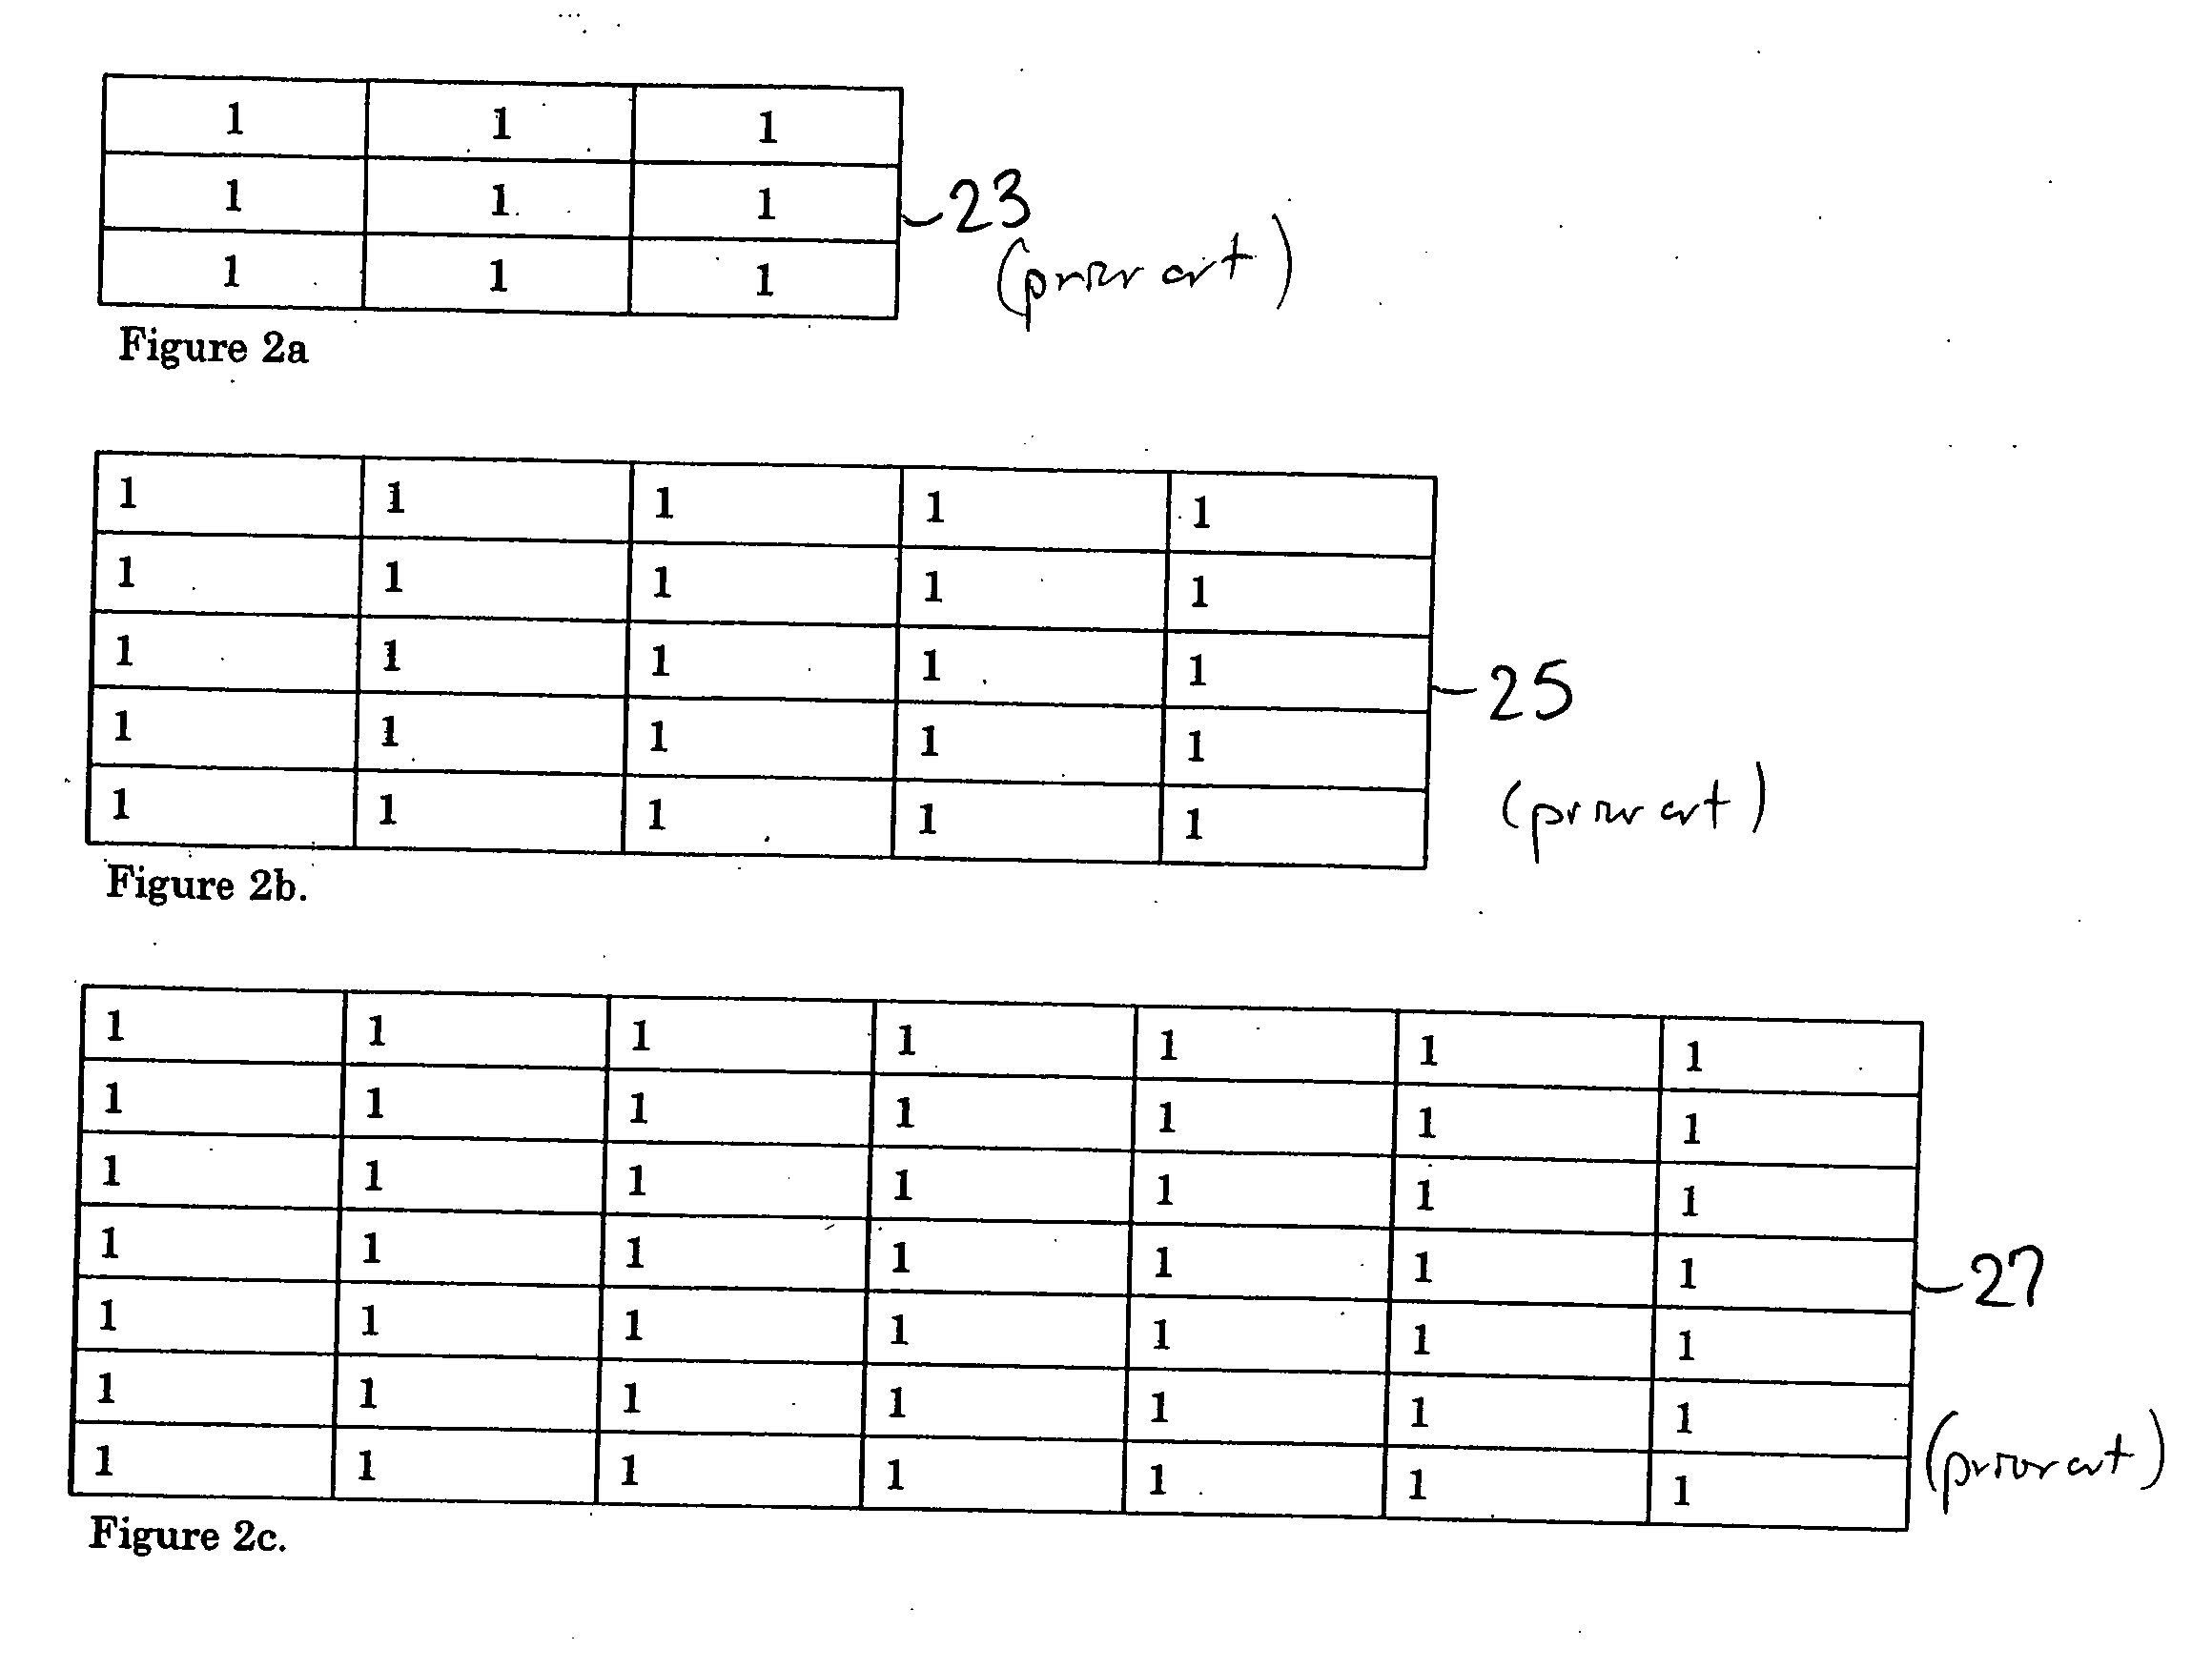 Method and apparatus of image processing to detect and enhance edges